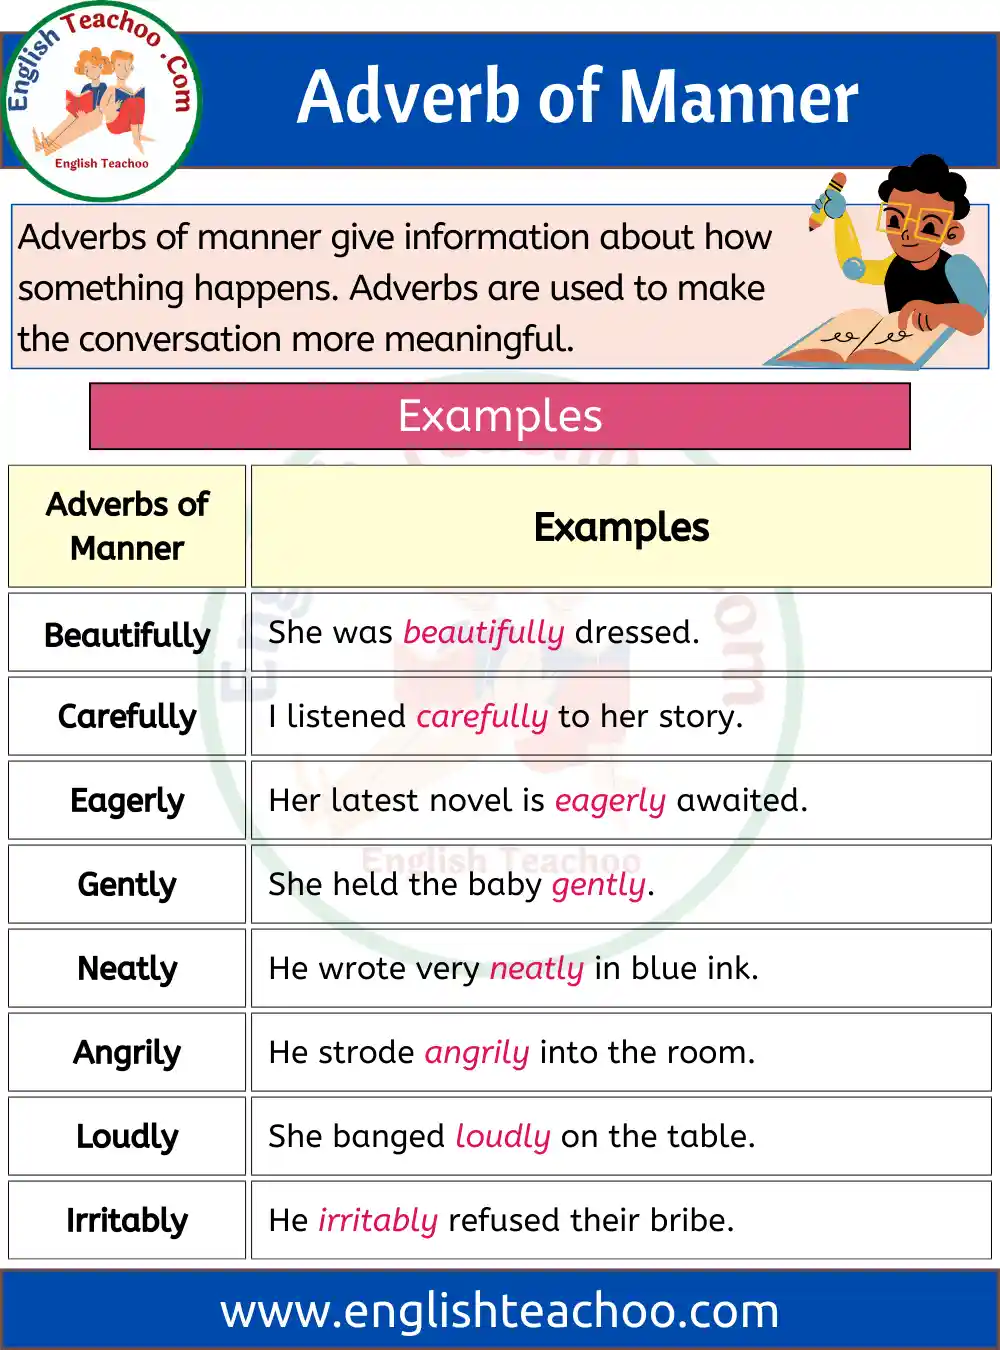 10 Examples of Adverb of Manner Sentences